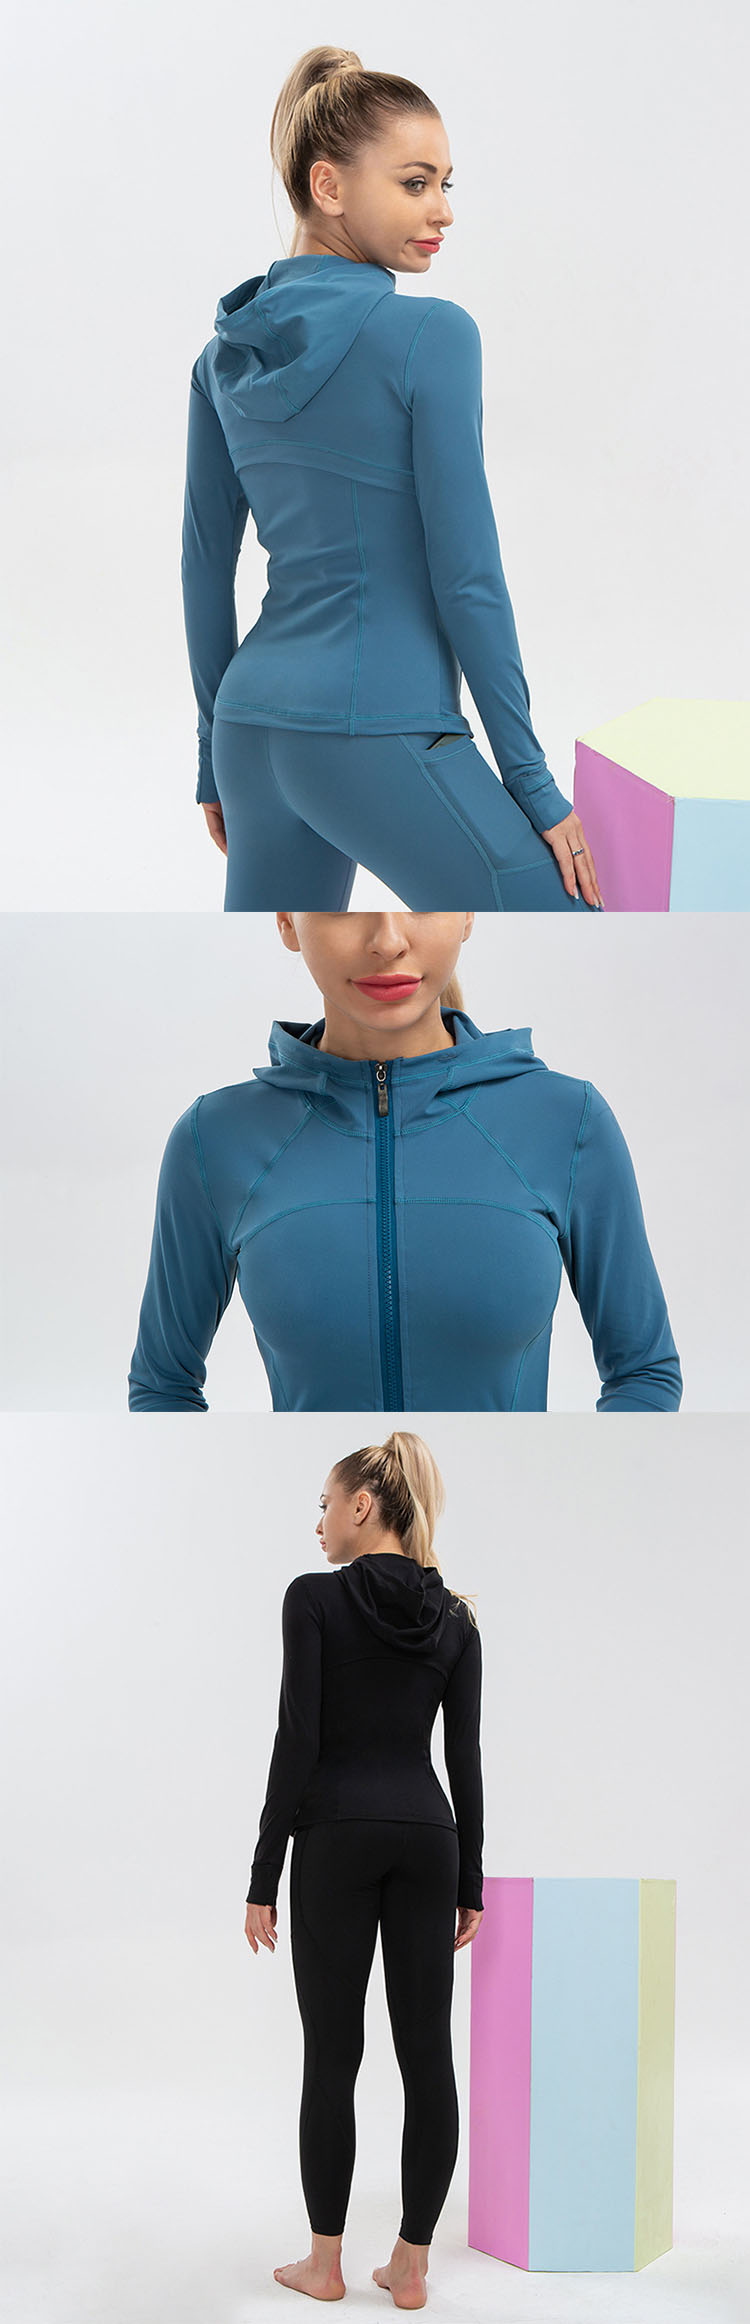 the extended silhouette protects and wraps the wearer